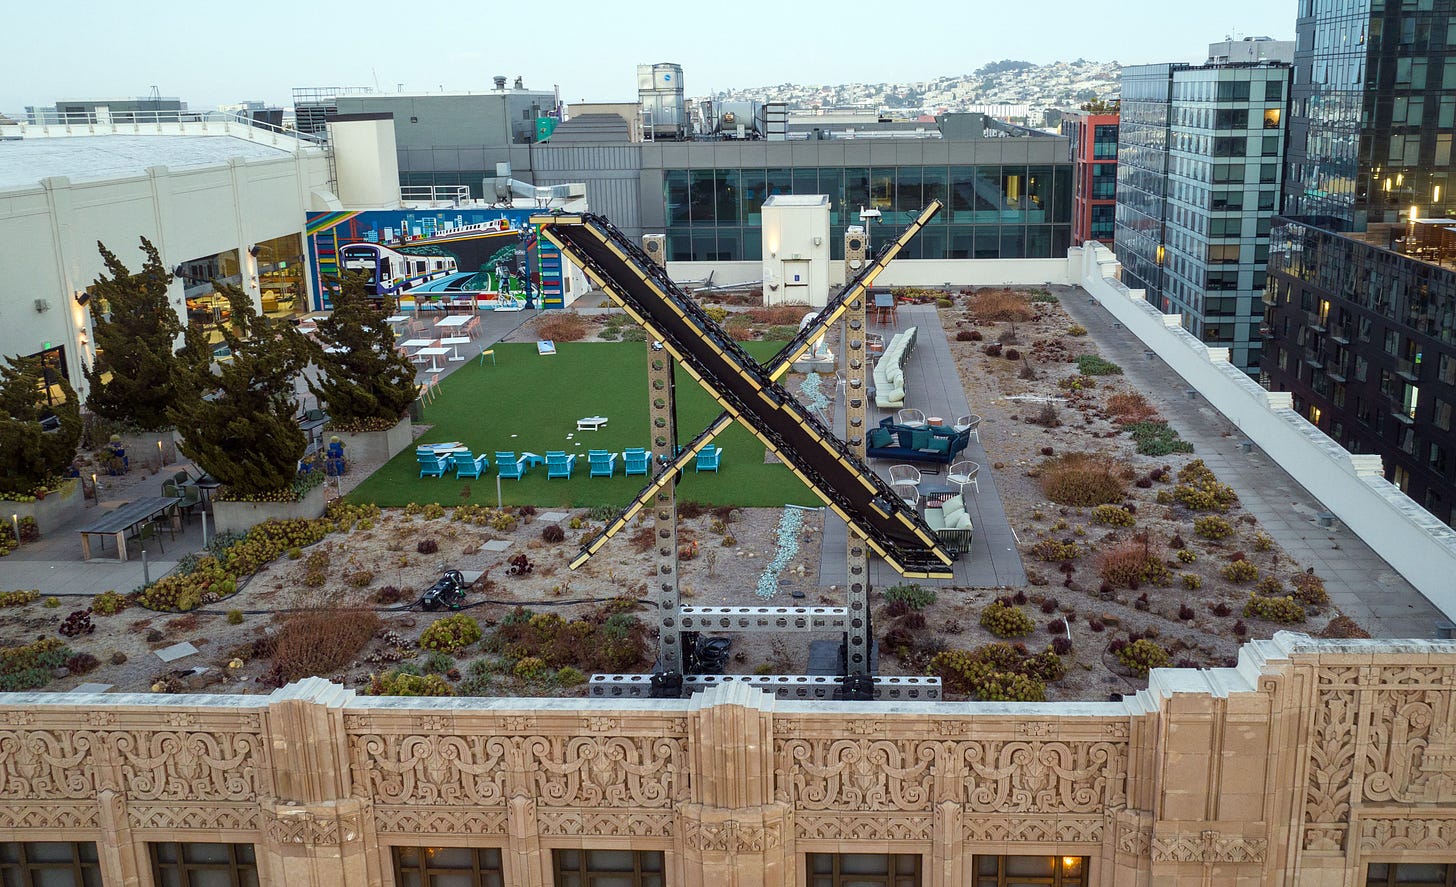 An aerial view shows a newly constructed X sign on the roof of the headquarters of the social media platform previously known as Twitter, in San Francisco, on July 29, 2023. Elon Musk killed off the Twitter logo on July 24, 2023, replacing the world-recognized blue bird with a white X as the tycoon accelerates his efforts to transform the floundering social media giant. Musk and the company's new chief executive Linda Yaccarino announced the rebranding on July 23, 2023, scrapping one of technology's most iconic brands in the latest shock move since the tycoon took over Twitter nine months ago. (Photo by JOSH EDELSON / AFP) (Photo by JOSH EDELSON/AFP via Getty Images)